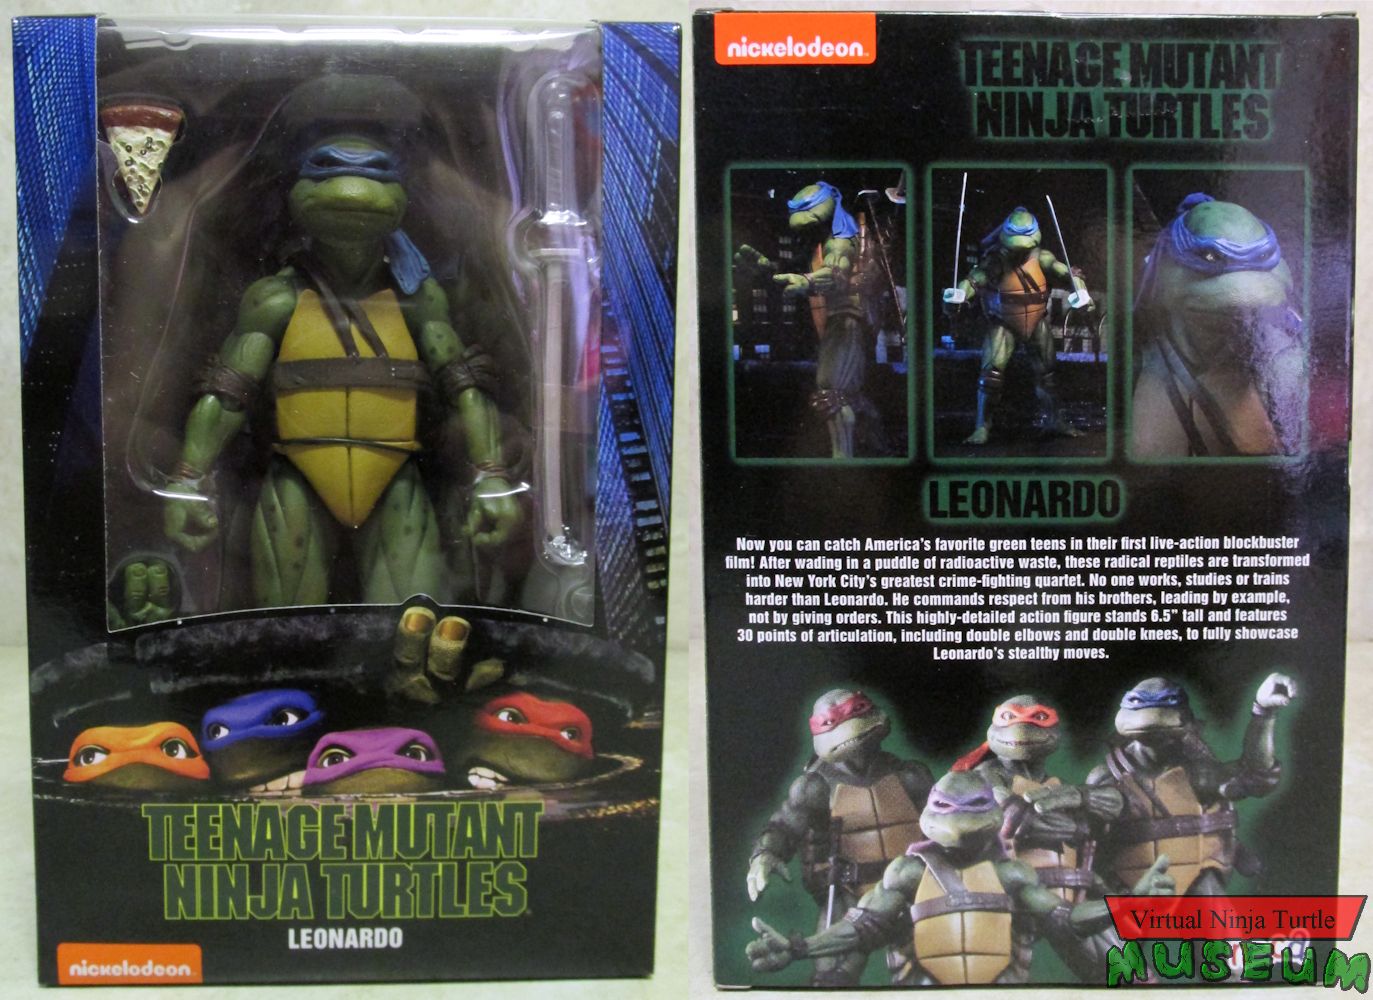 2nd release box front and back